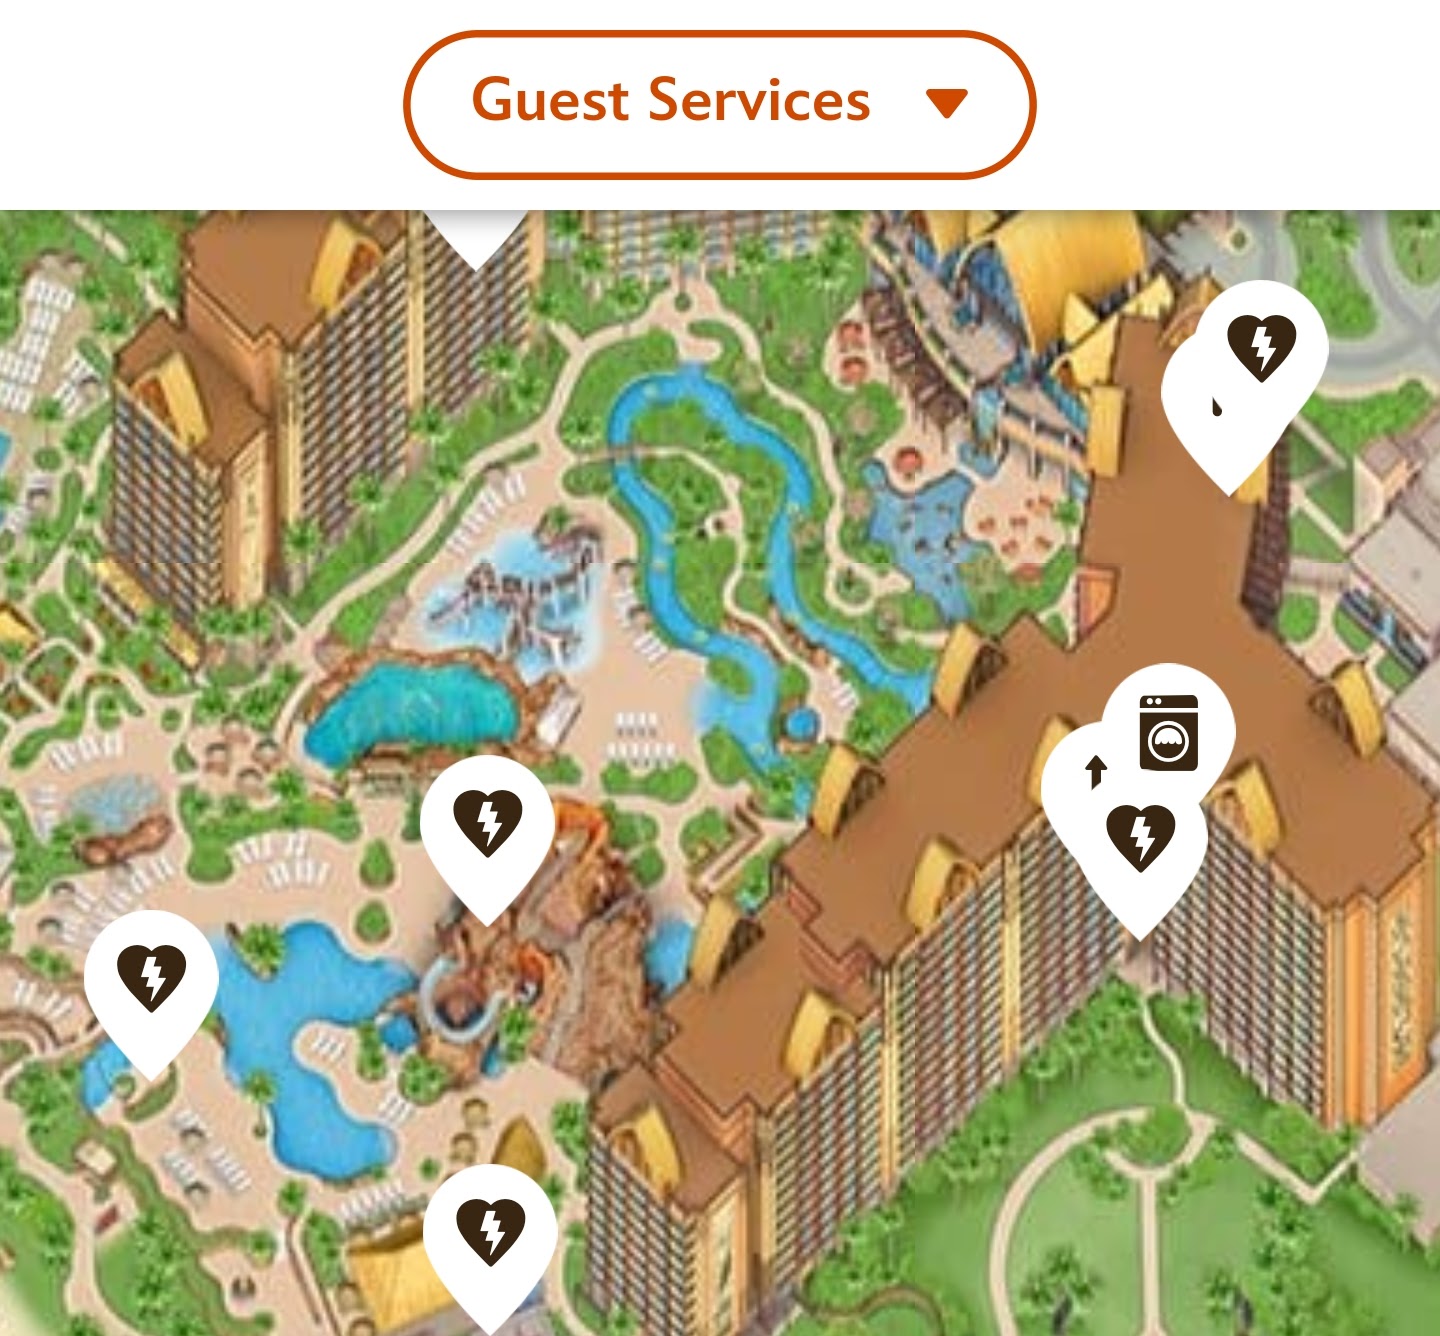 Guest Services - Aulani Resort App